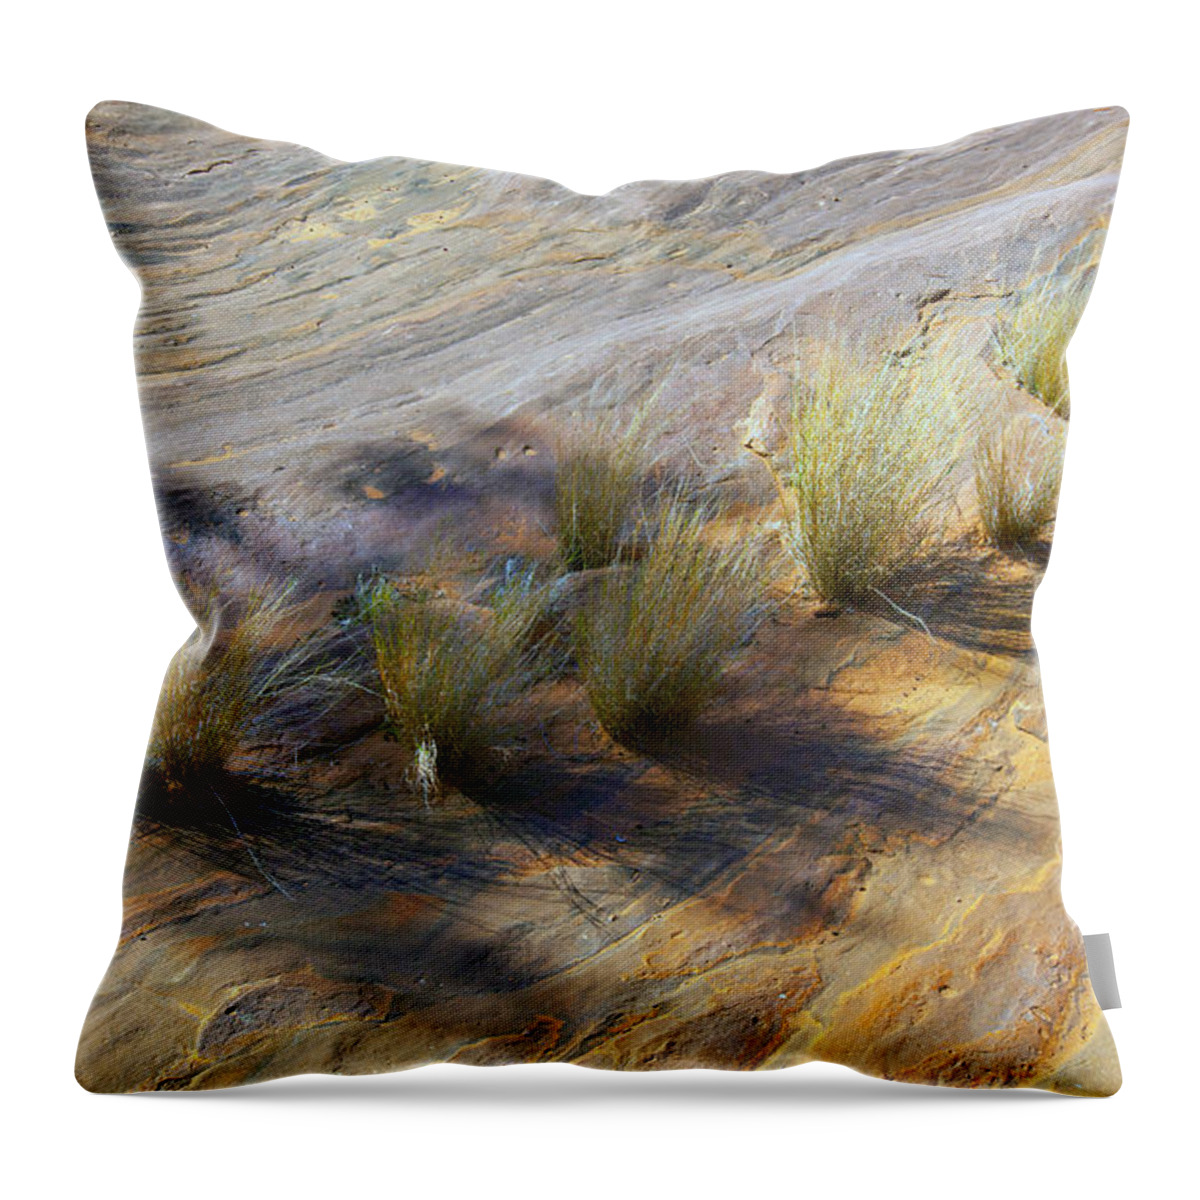 Palm Valley Central Australia Landscape Outback Australian Throw Pillow featuring the photograph Palm Valley Rock Textures by Bill Robinson